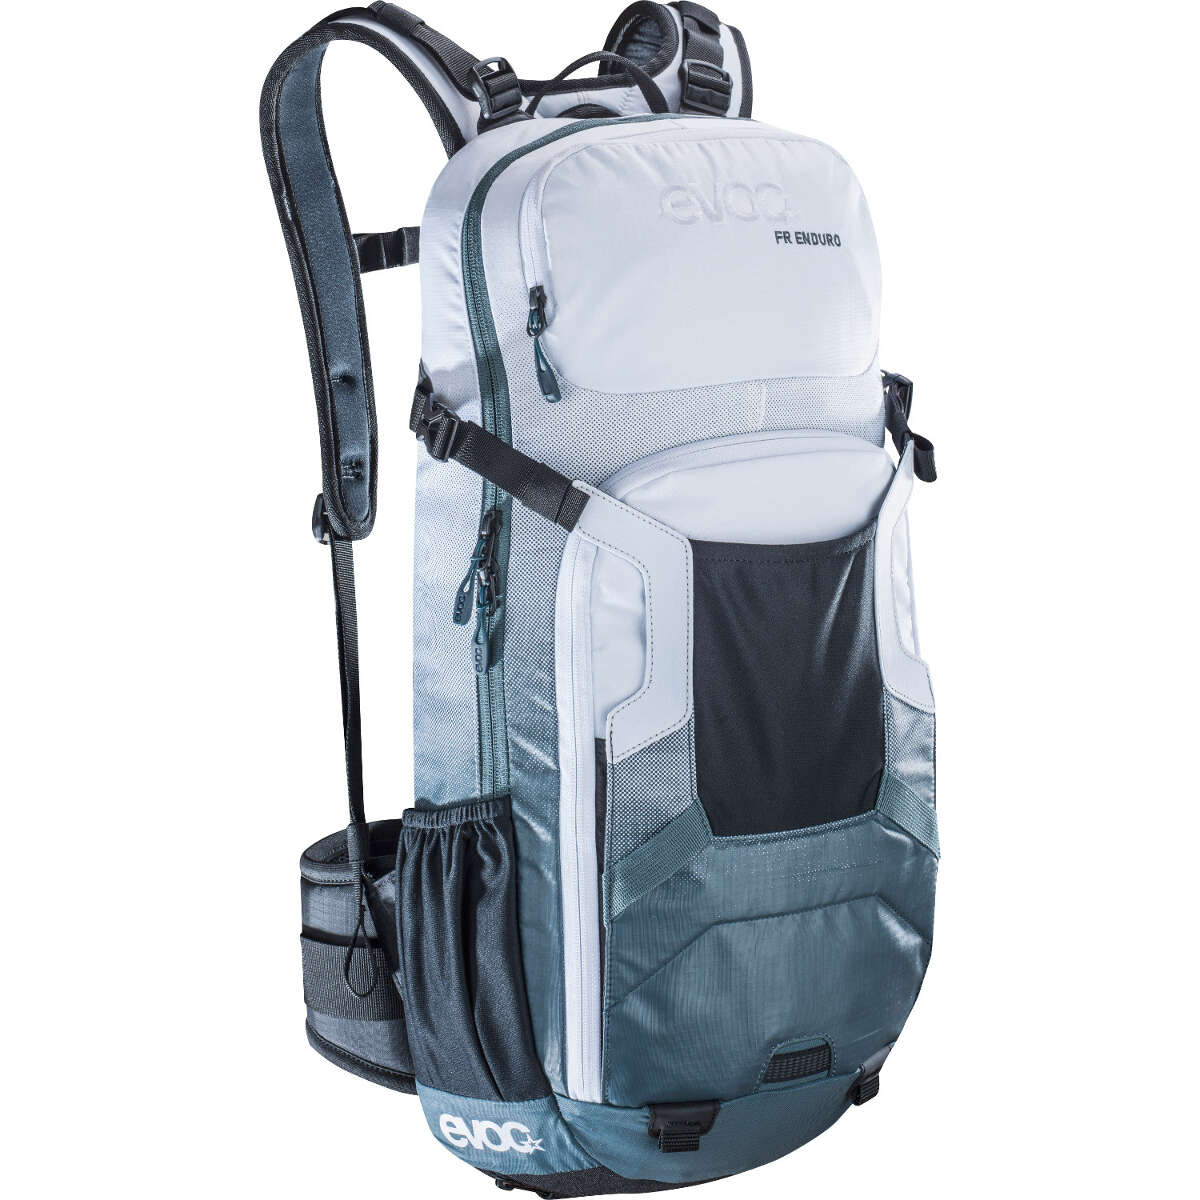 Evoc Protector Backpack with Hydration System Compartment FR Enduro White-Slate, 16 Liter